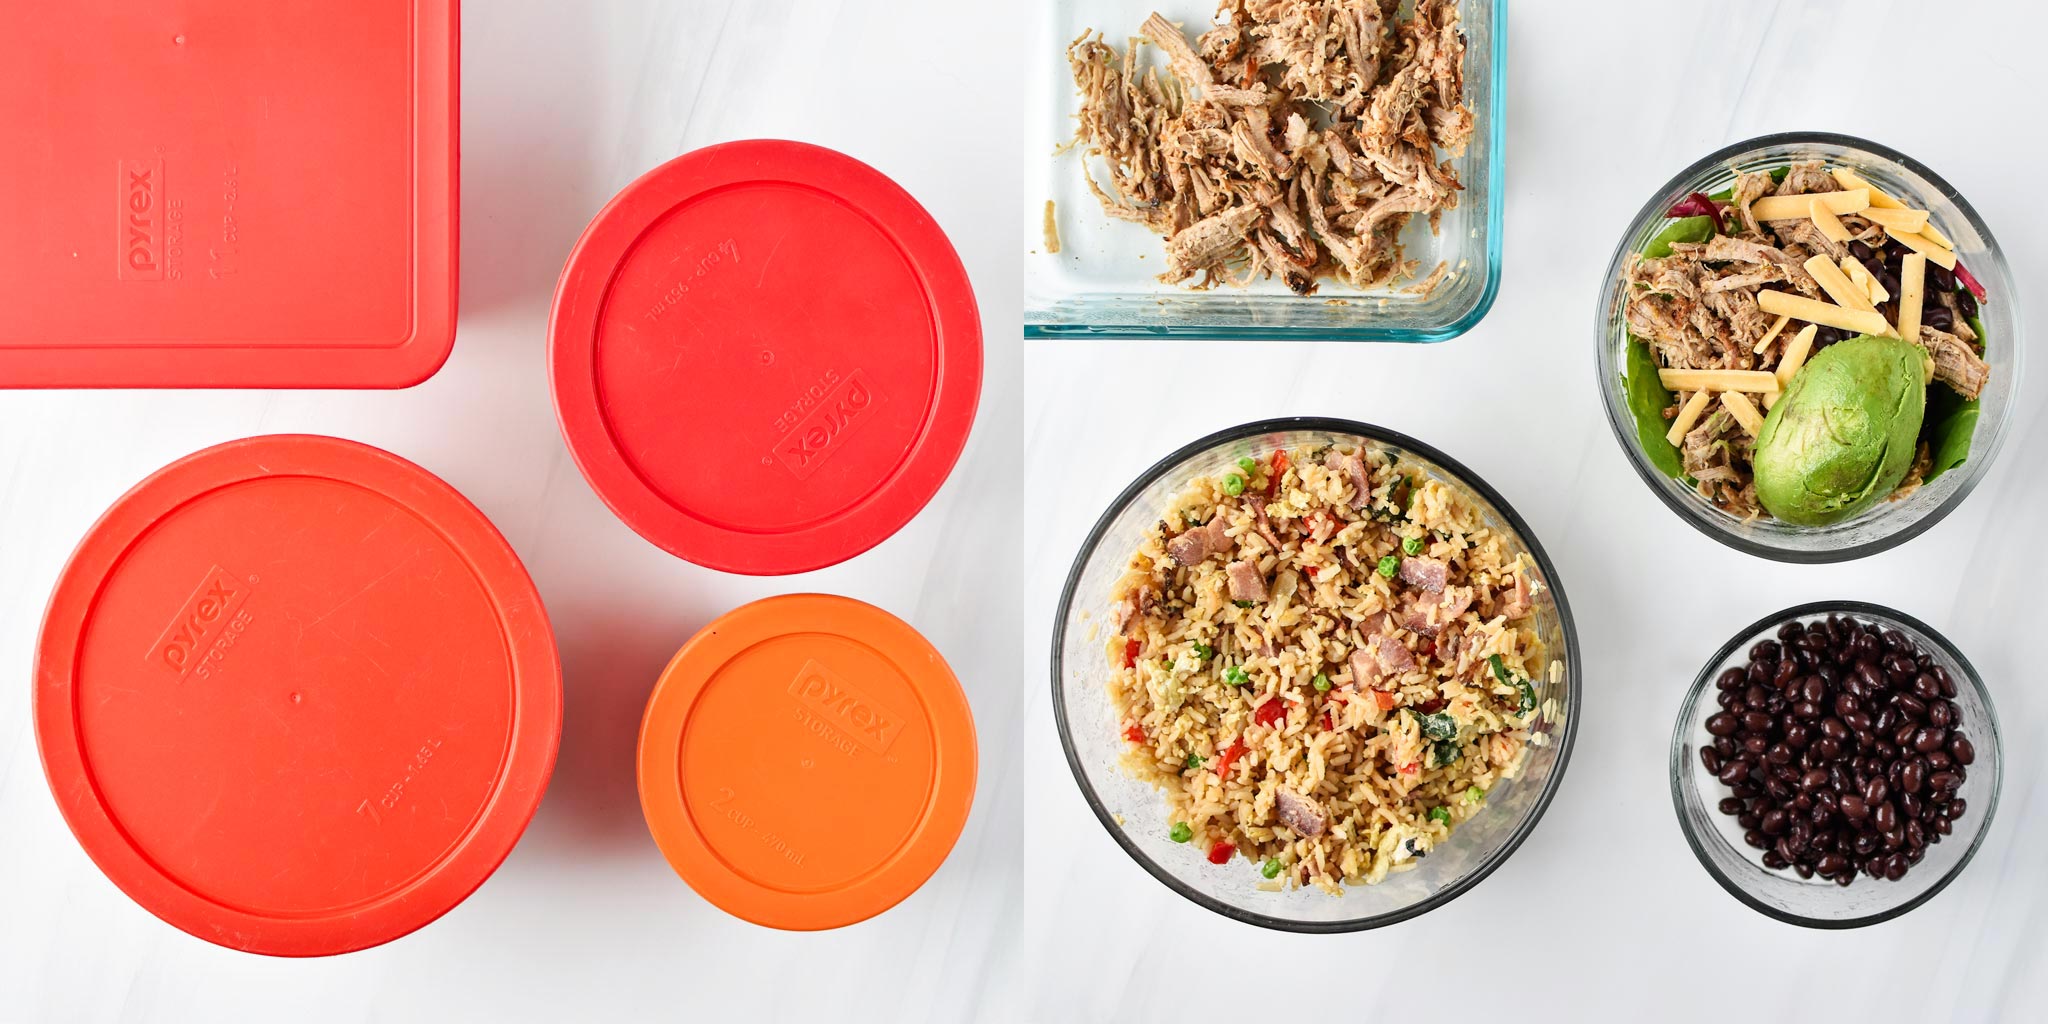 Various stored leftovers in Pyrex containers from my fridge, one side with lids on and one side with lids off.